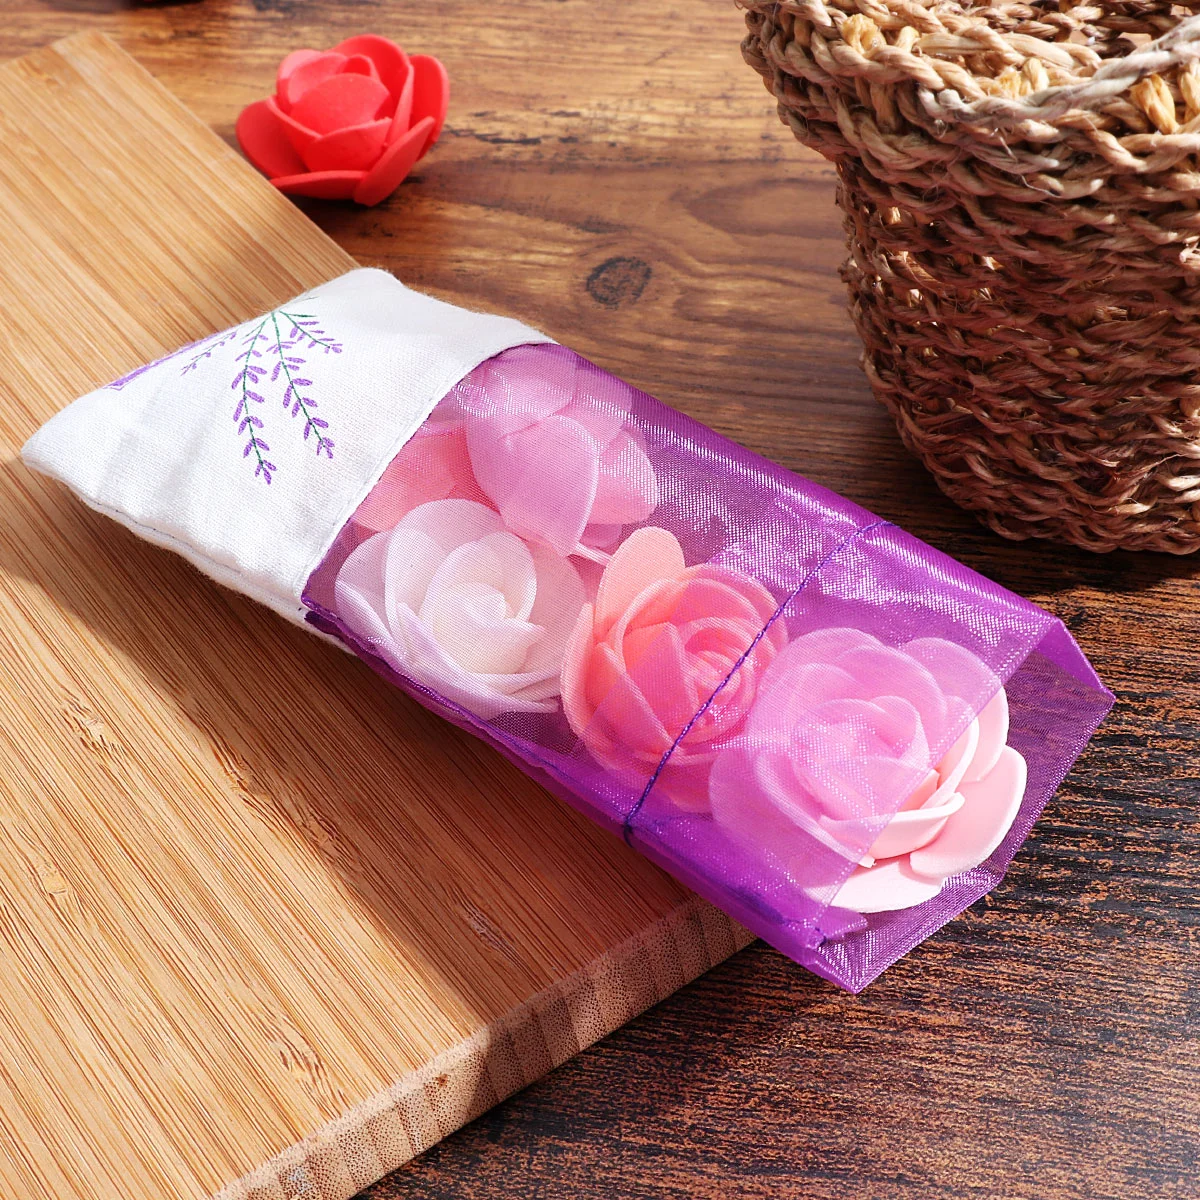  VOSAREA 20pcs flower paper wrapping floral wrapping